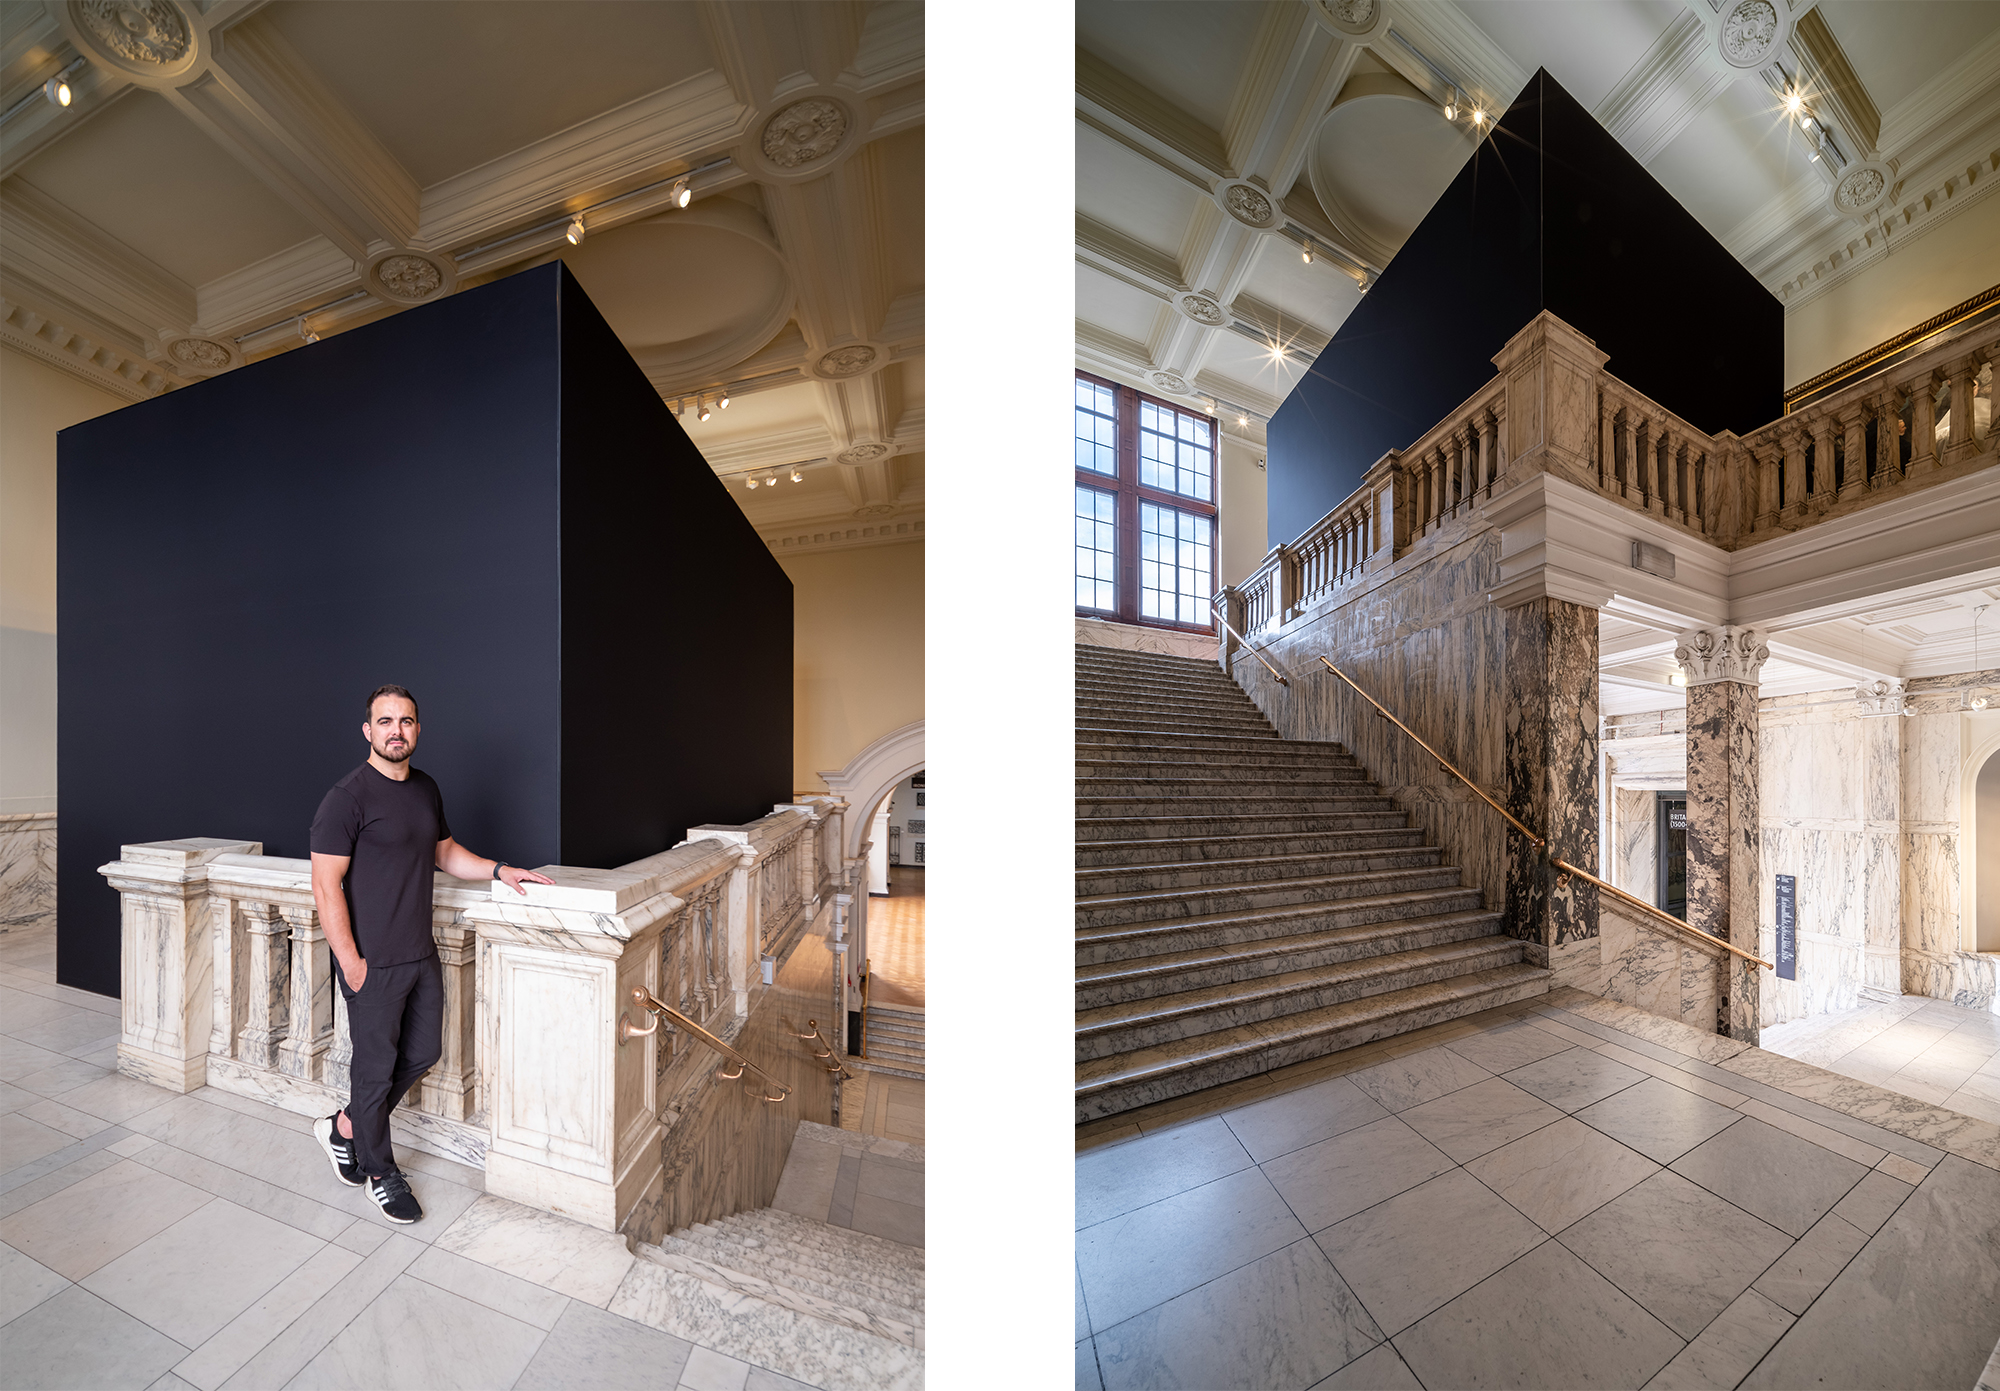 Outside AVALANCHE exhibition: a massive black cube in a Victorian hallway. 